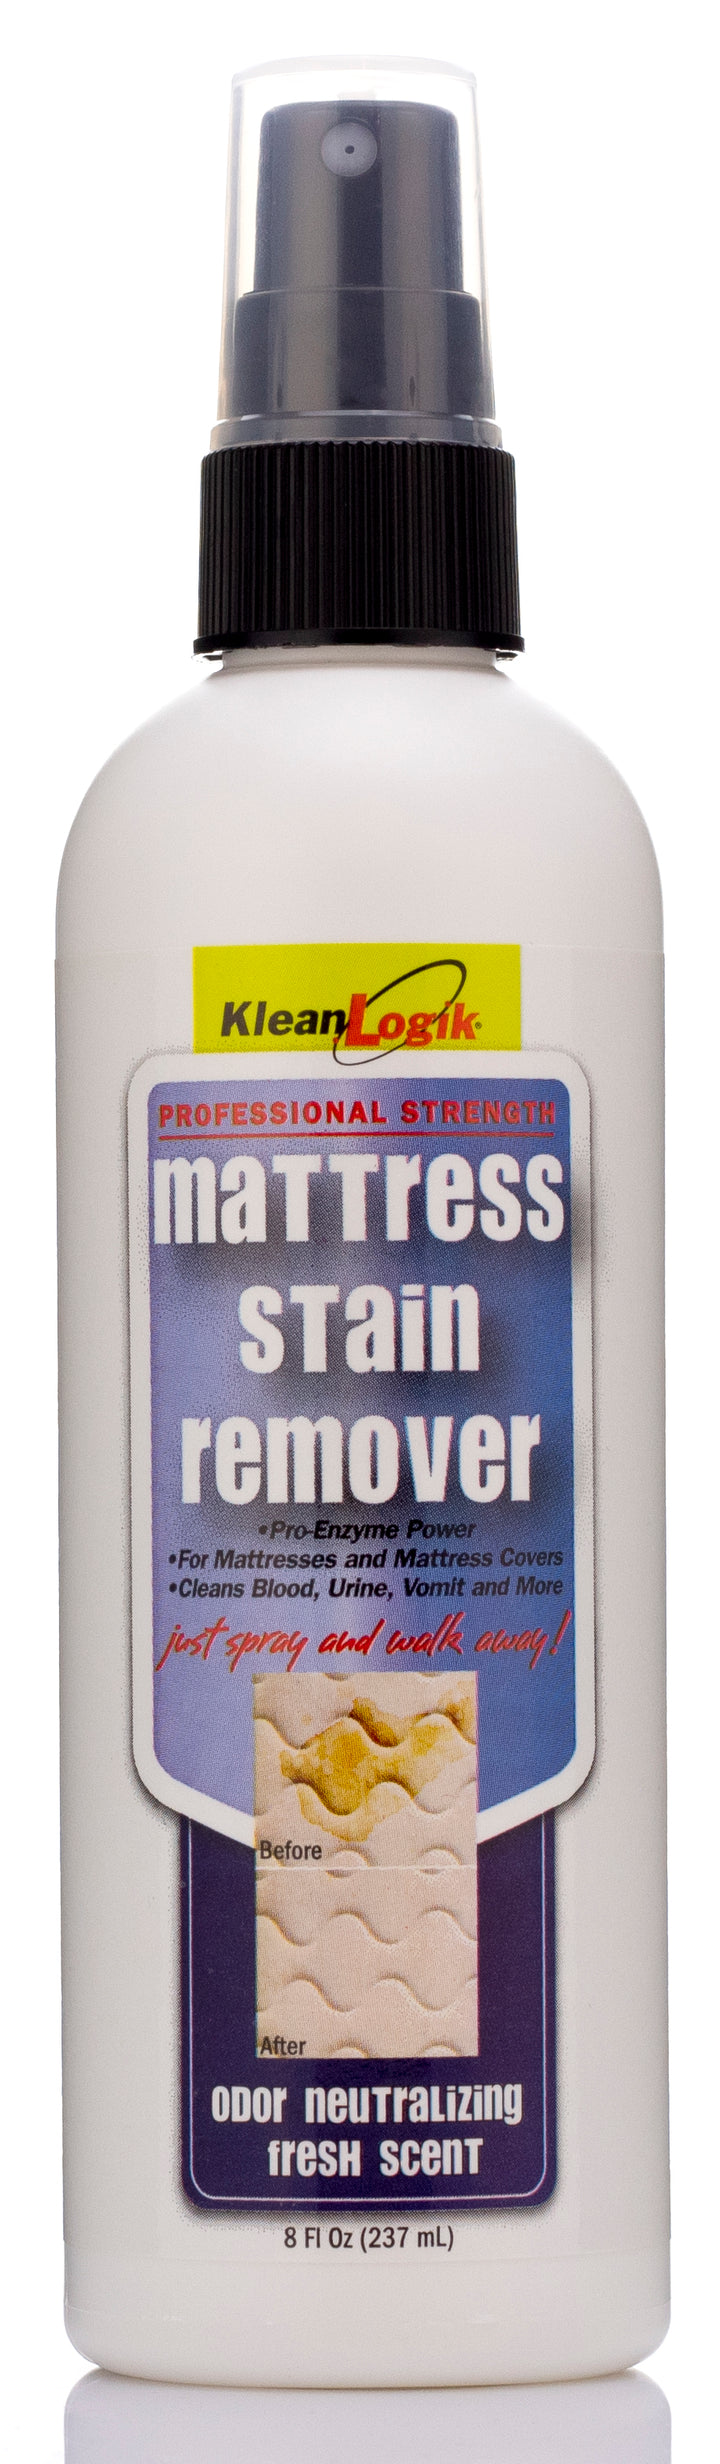 Mattress Stain Remover Cleaner Dust Mite dirty Bed Cleaning House Inhibitor  New